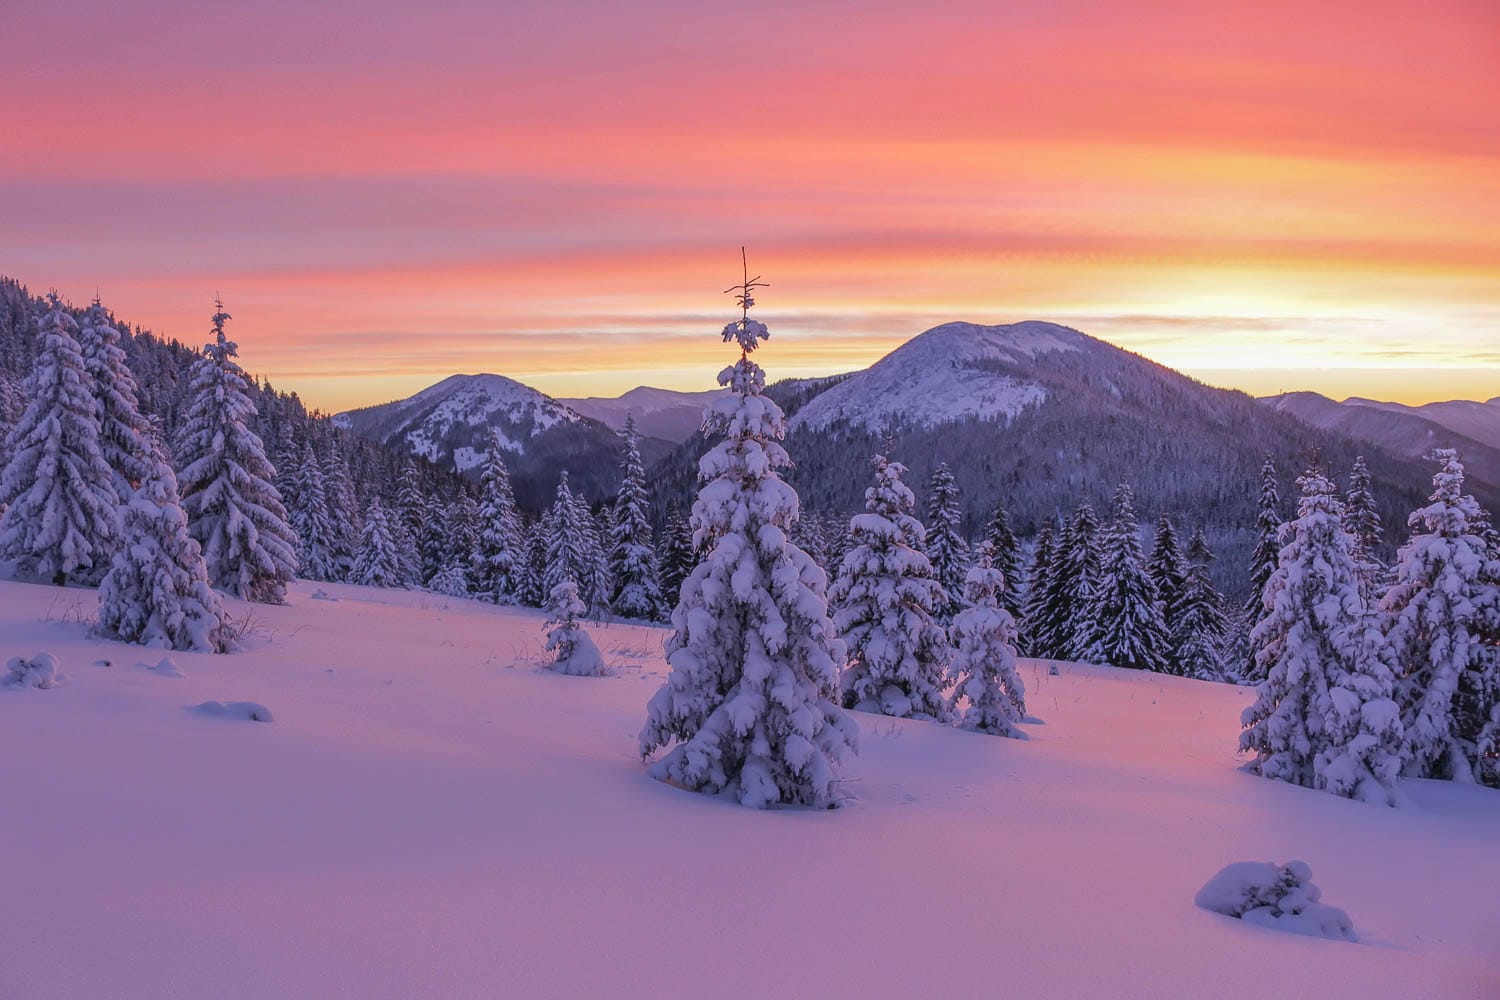 Snow Photography Tips: Your Guide to Taking Great Photos in the Snow